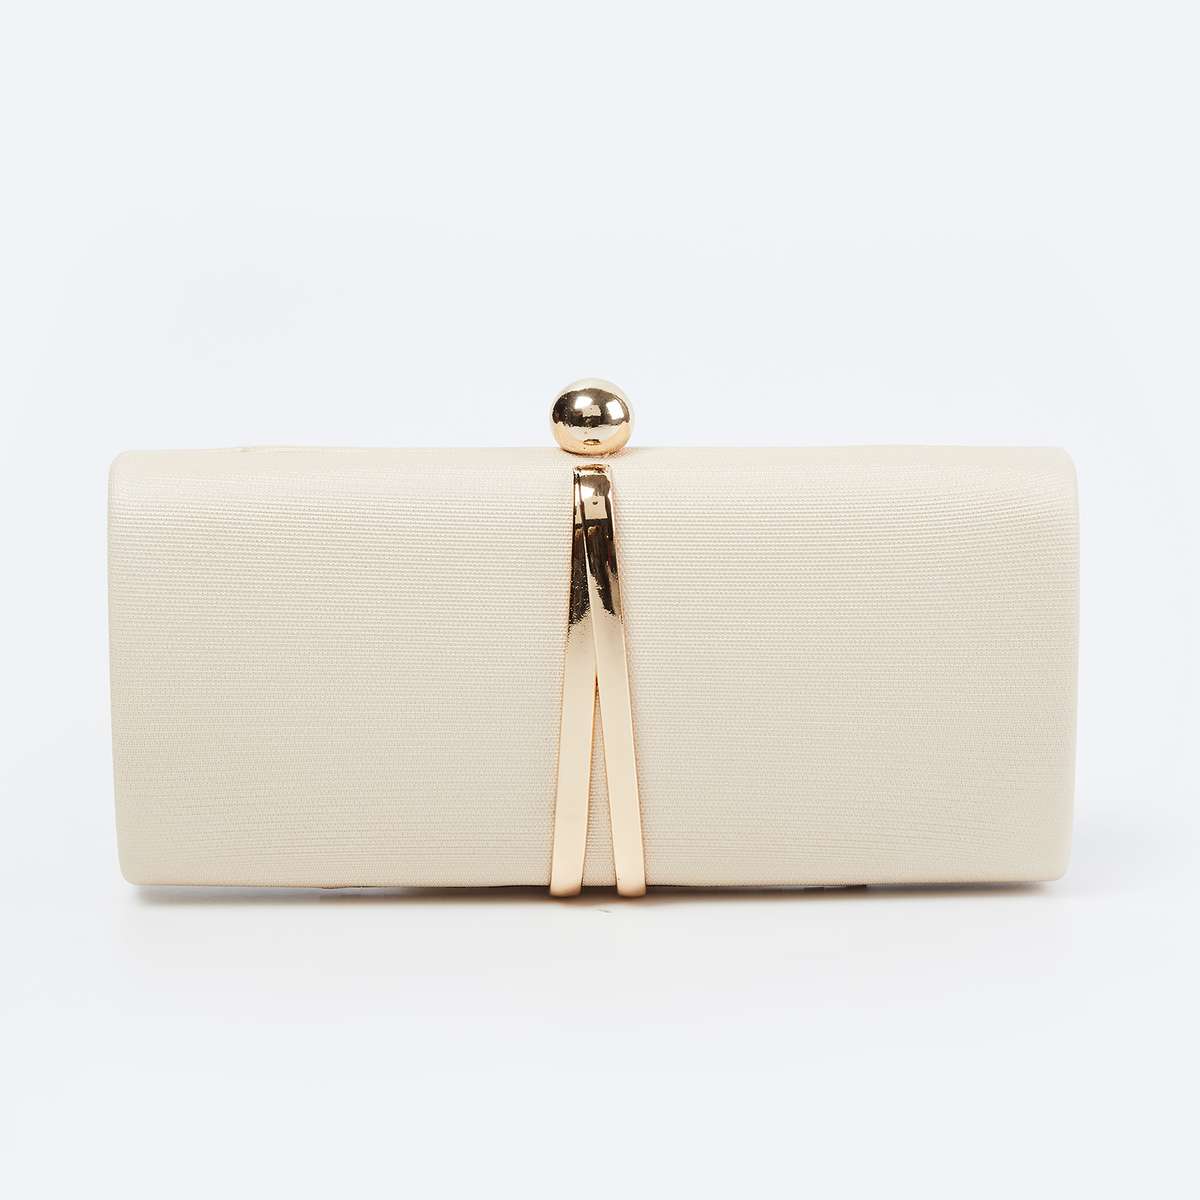 3.CODE Women Solid Clutch with Chain Strap